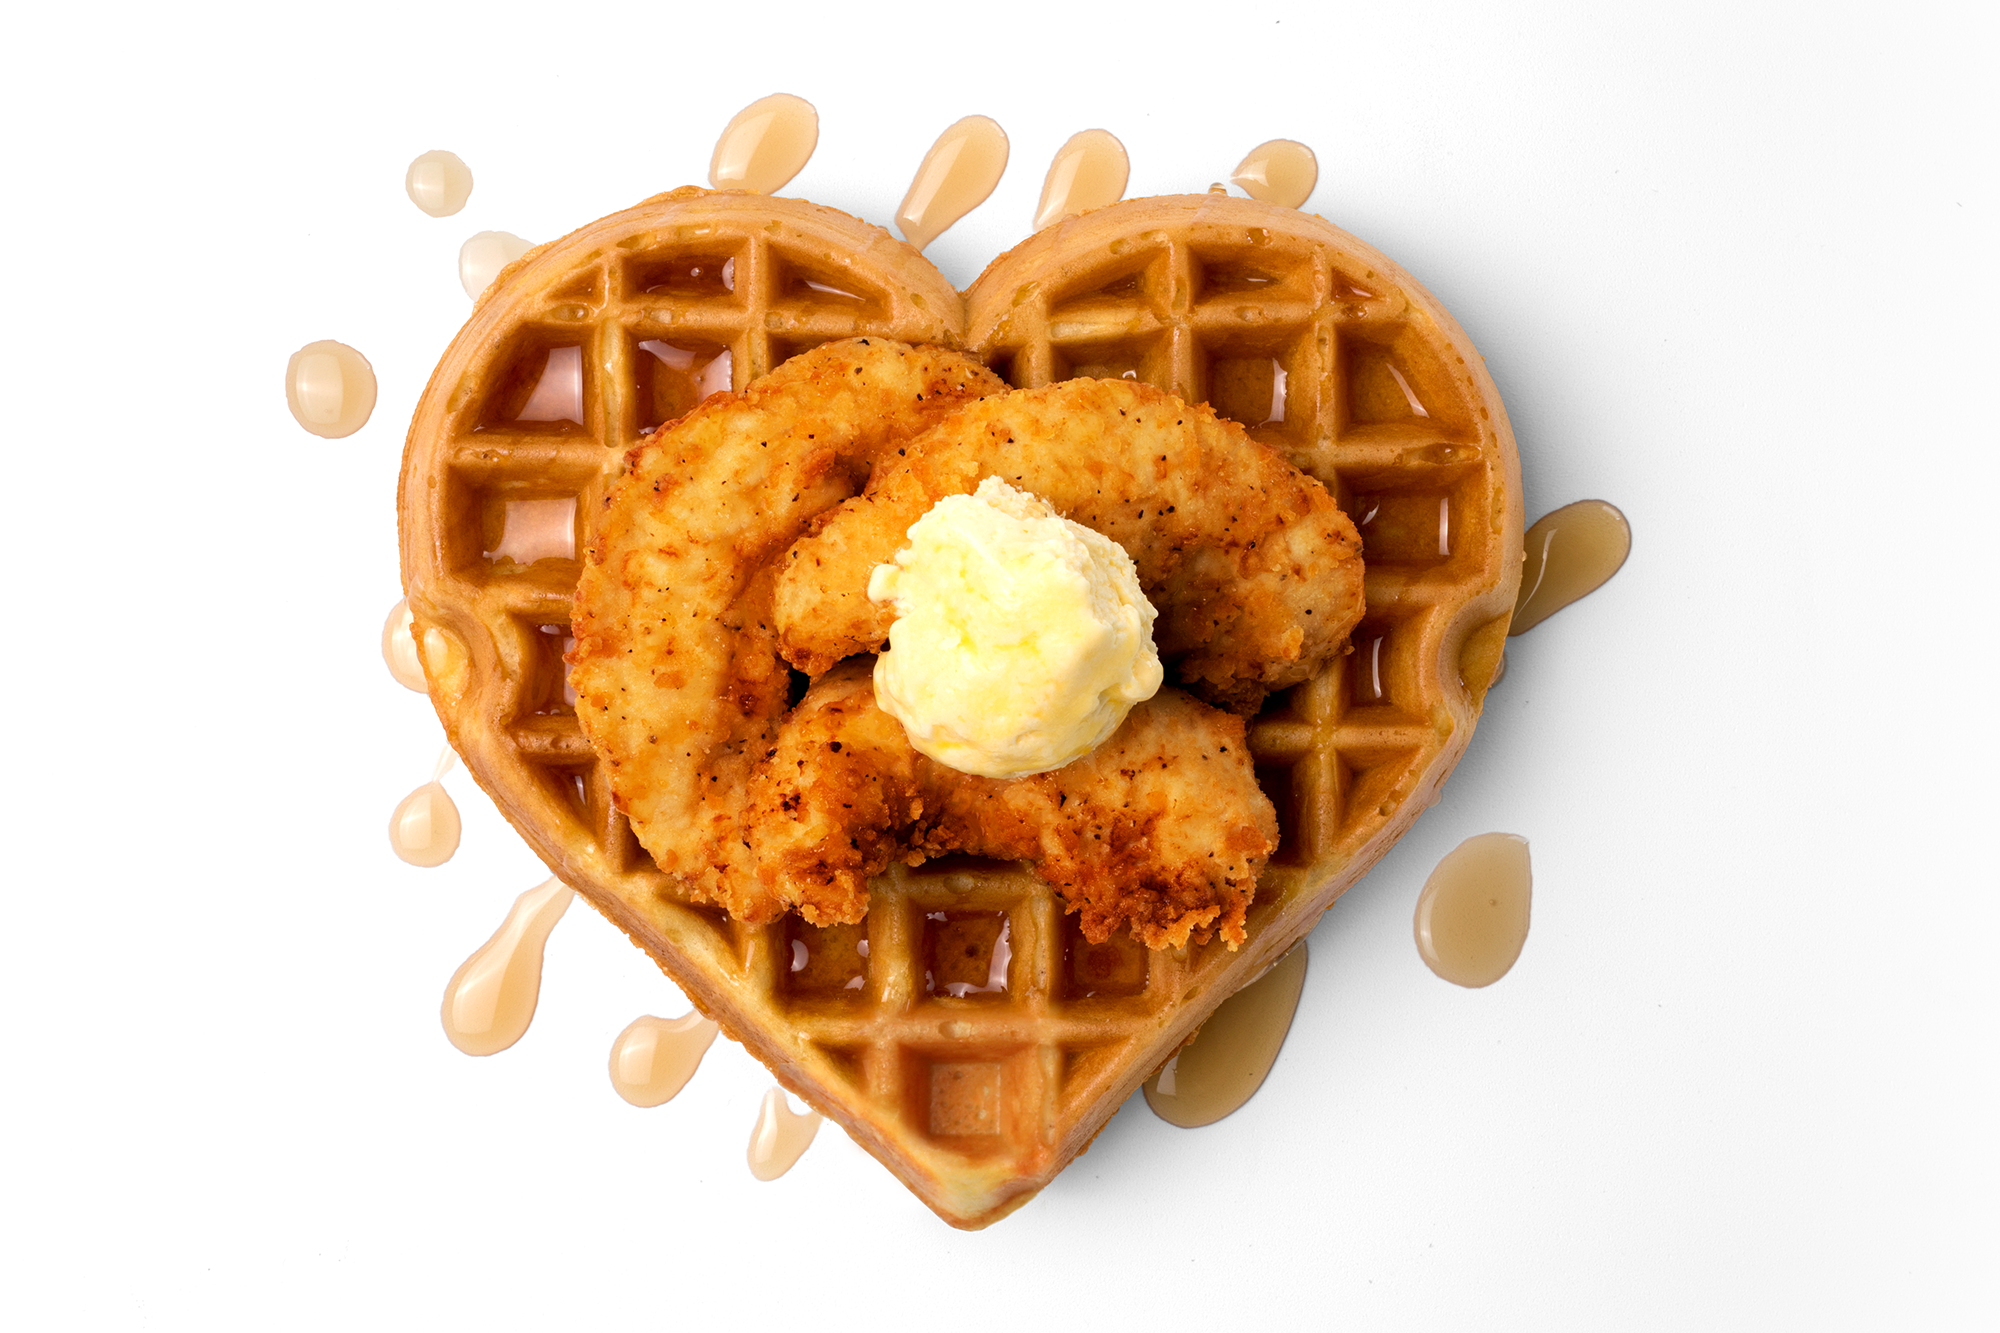 Heart-Shaped Waffles For Mother’s Day